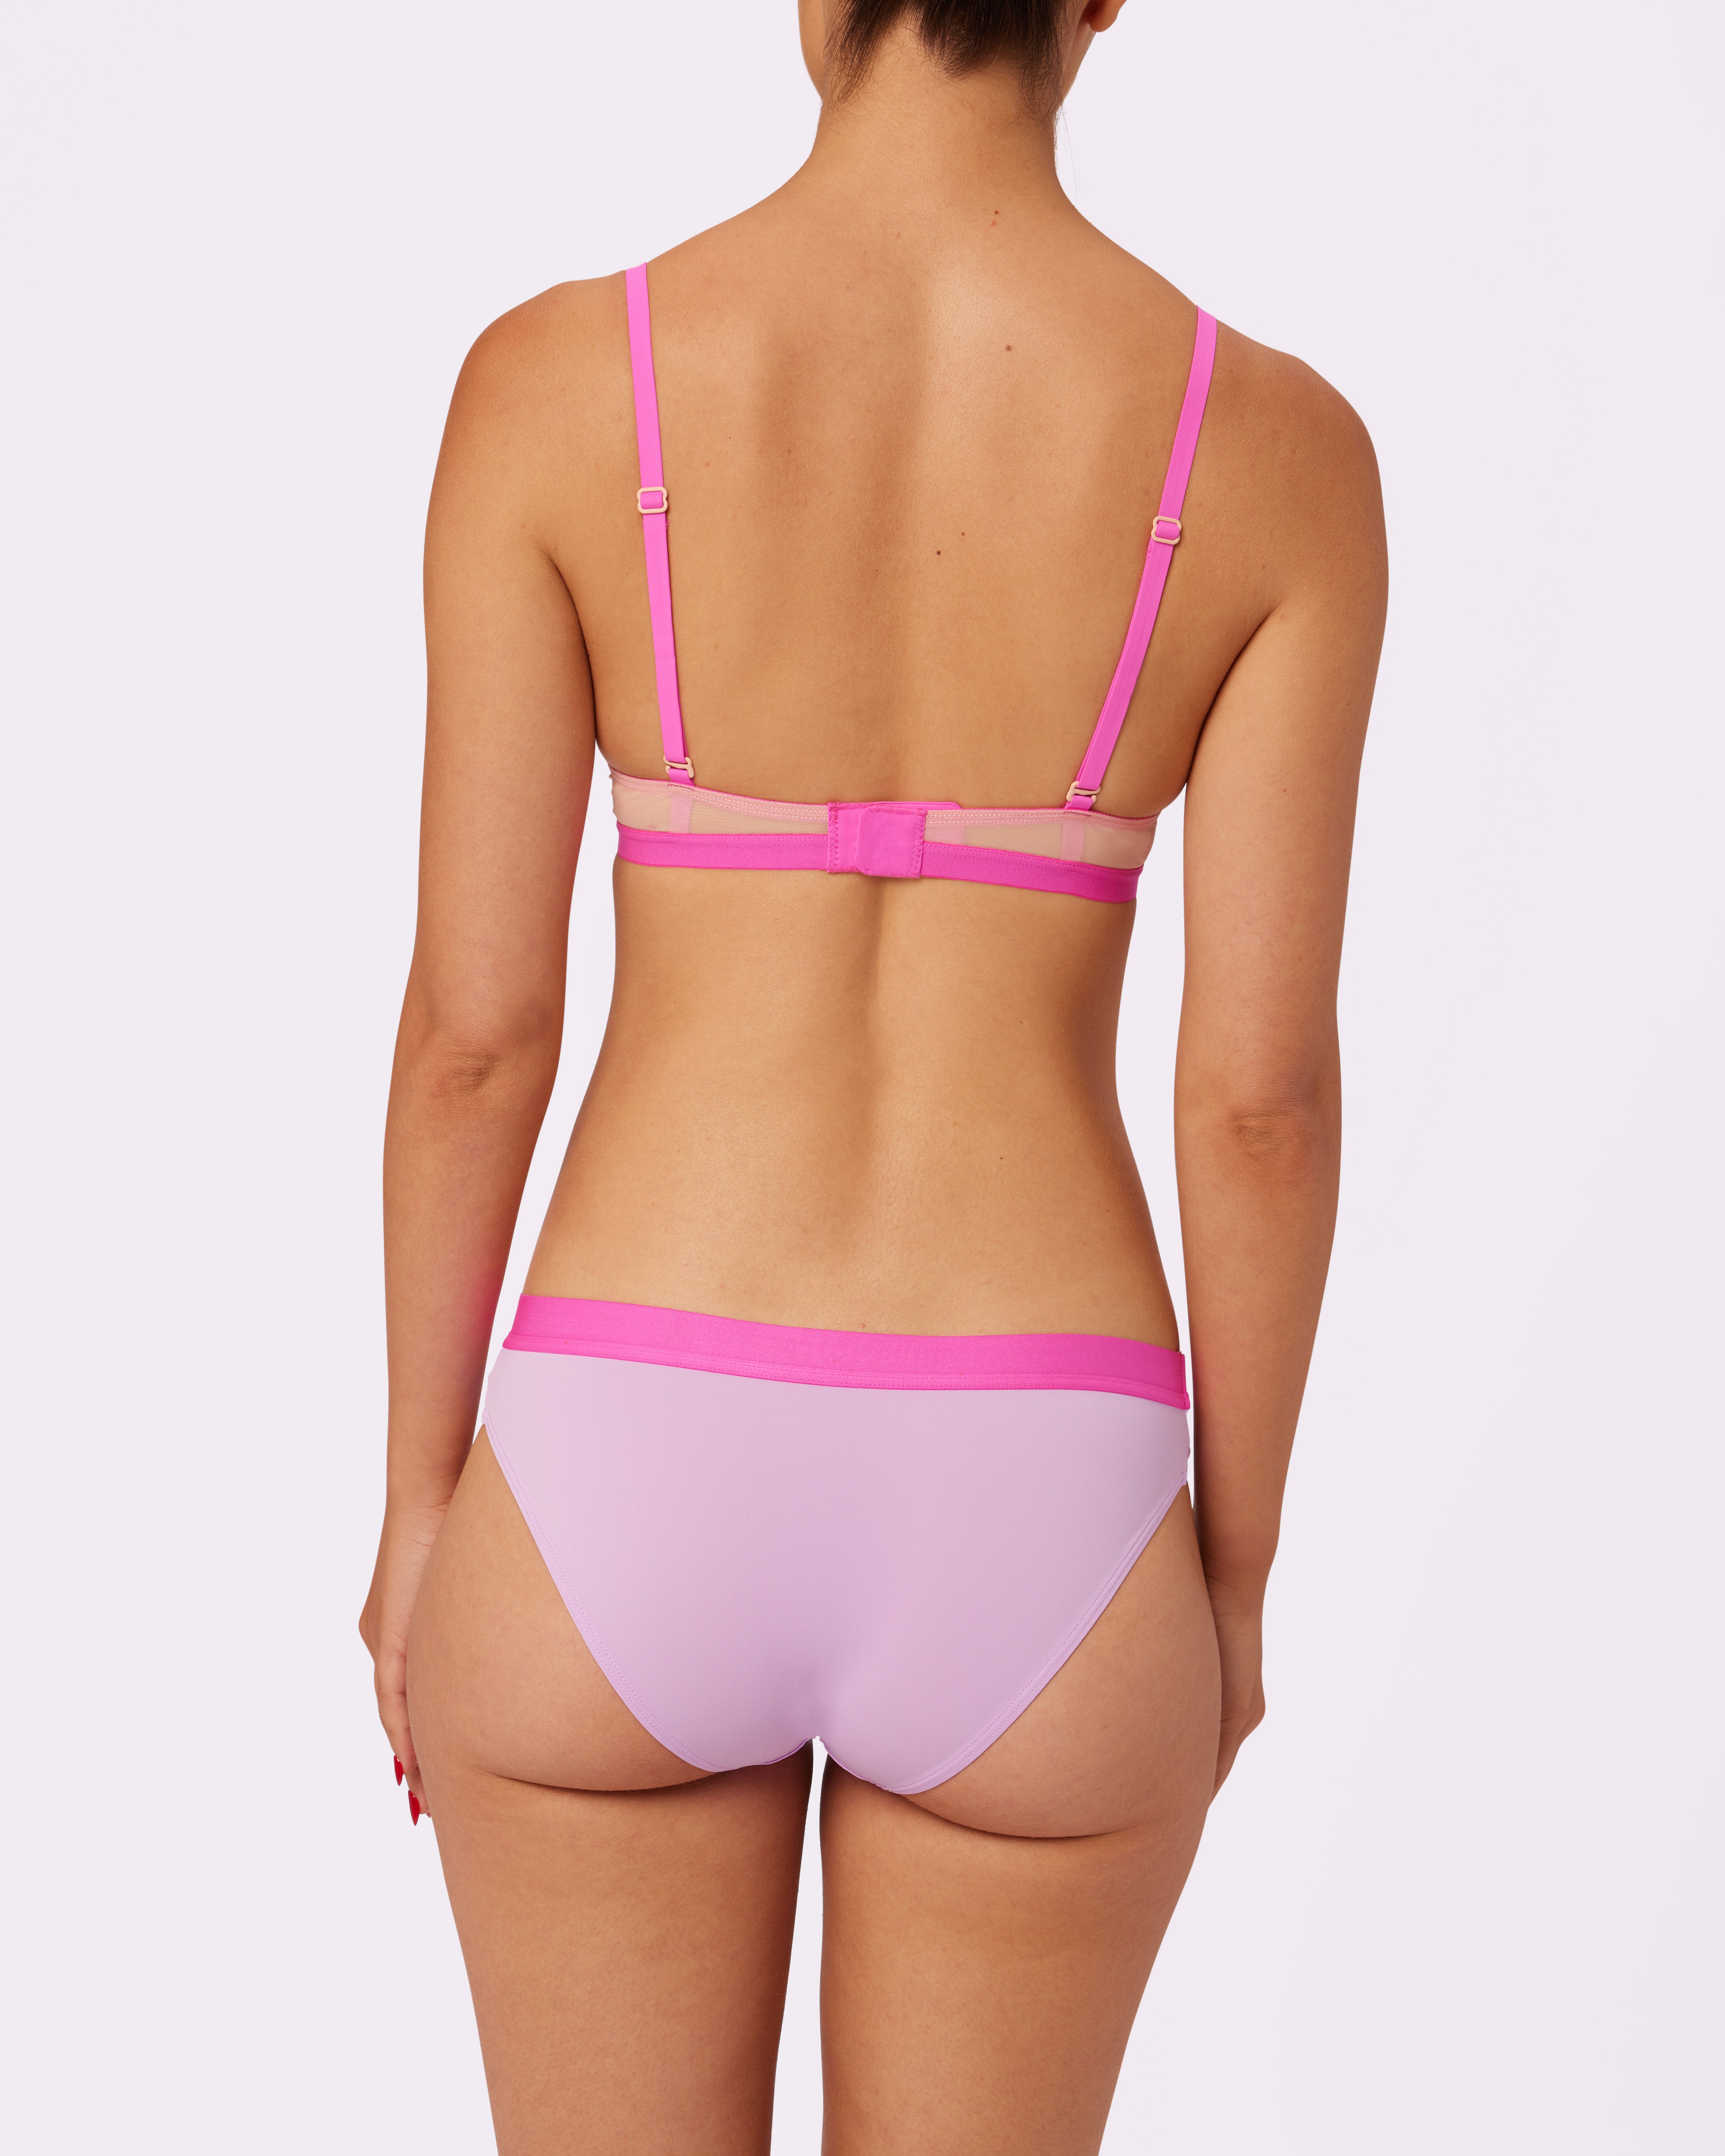 Dream Comfort Brief, Ultra-Soft Re:Play